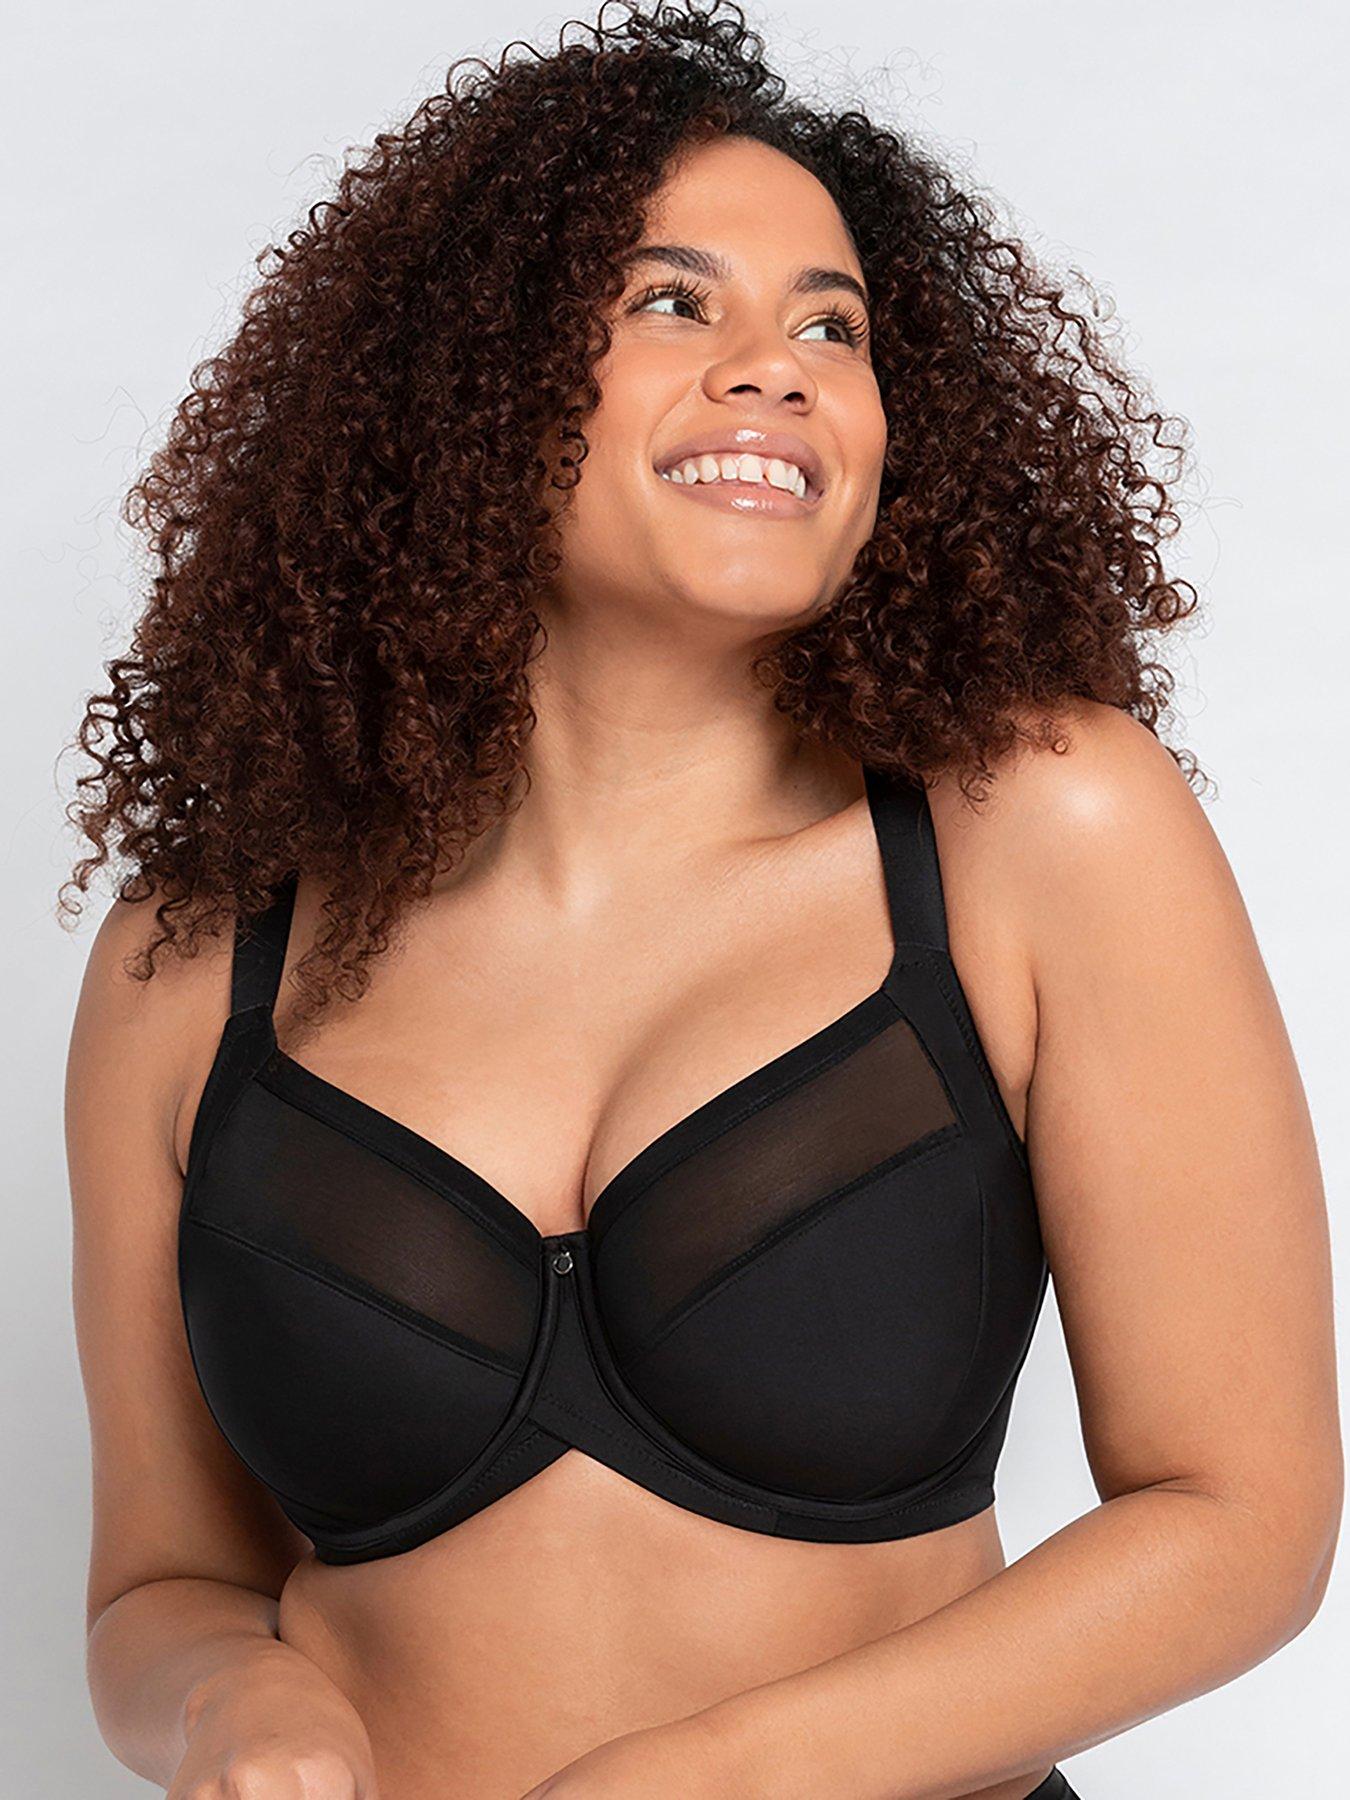 Berlei UK on X: Our Beauty Minimiser Bra and matching Beauty Brief helps  support and reduce beautifully! Check out our Beauty Minimiser Bra in the  link -  #bra #lingerie #berlei #lingerieaddict #